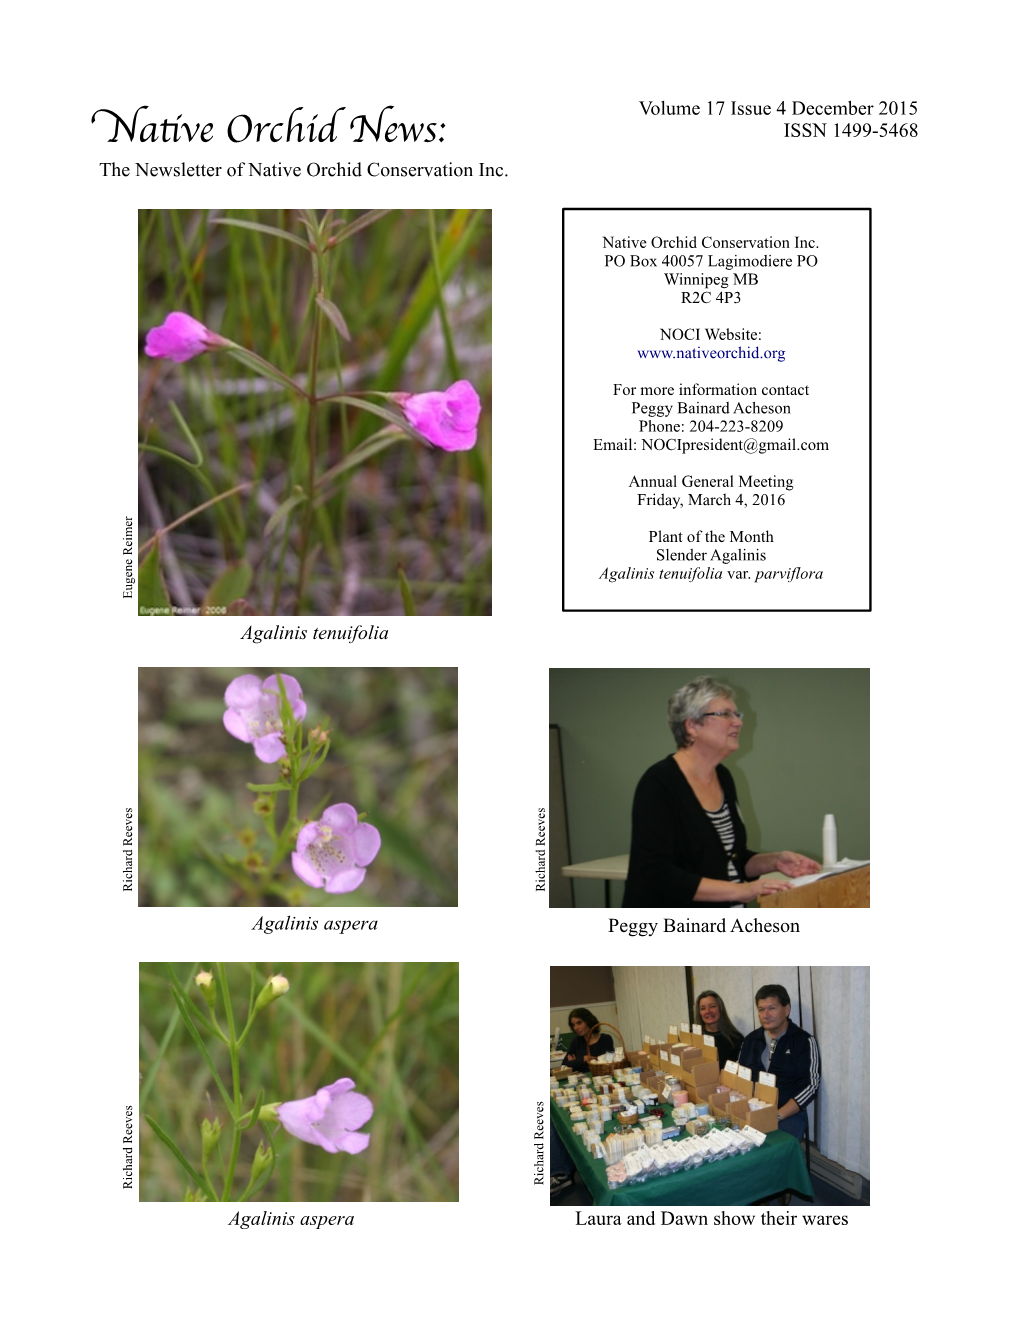 Native Orchid News: ISSN 1499-5468 the Newsletter of Native Orchid Conservation Inc